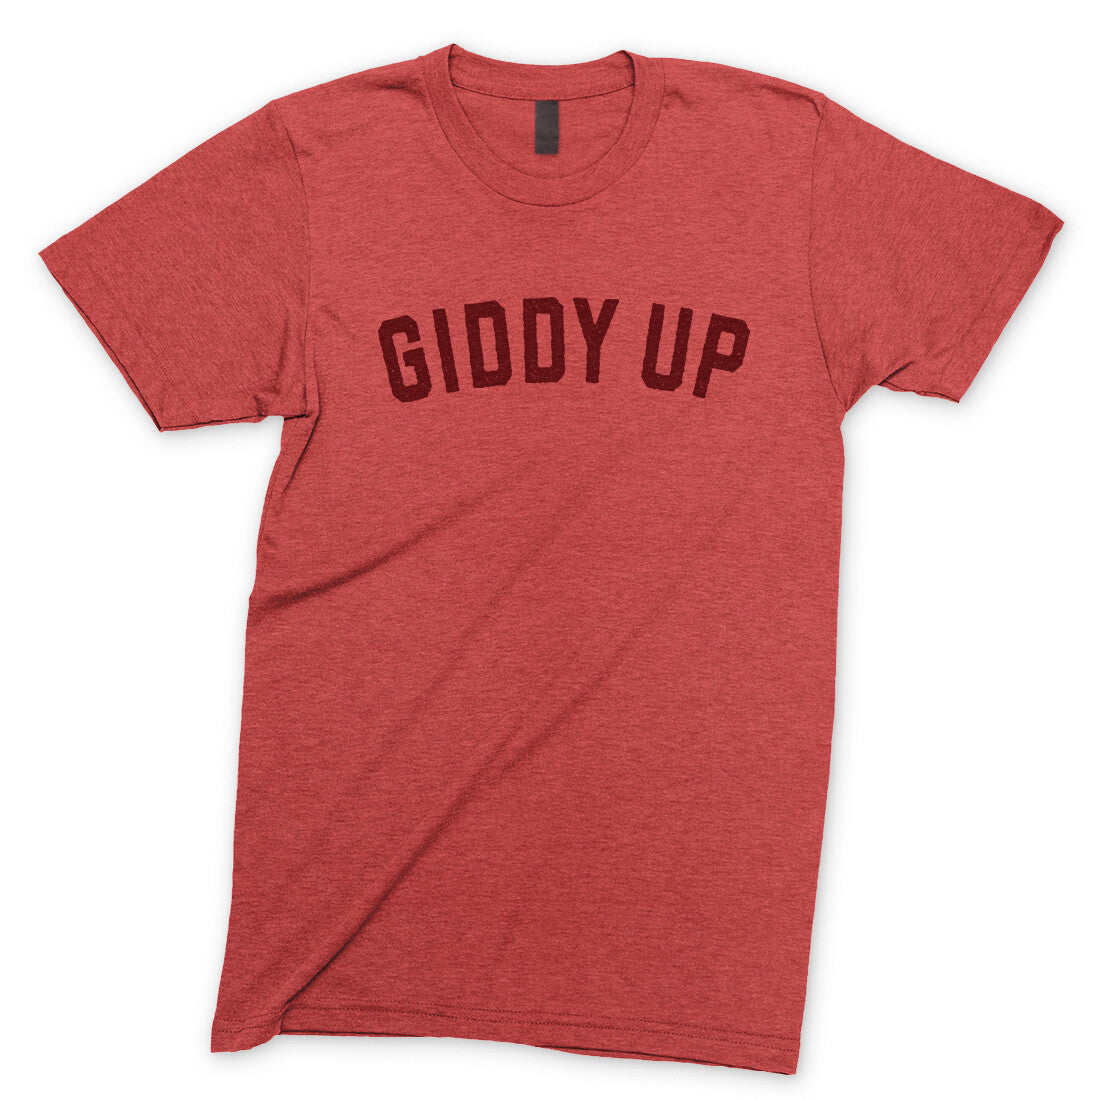 Giddy Up in Heather Red Color